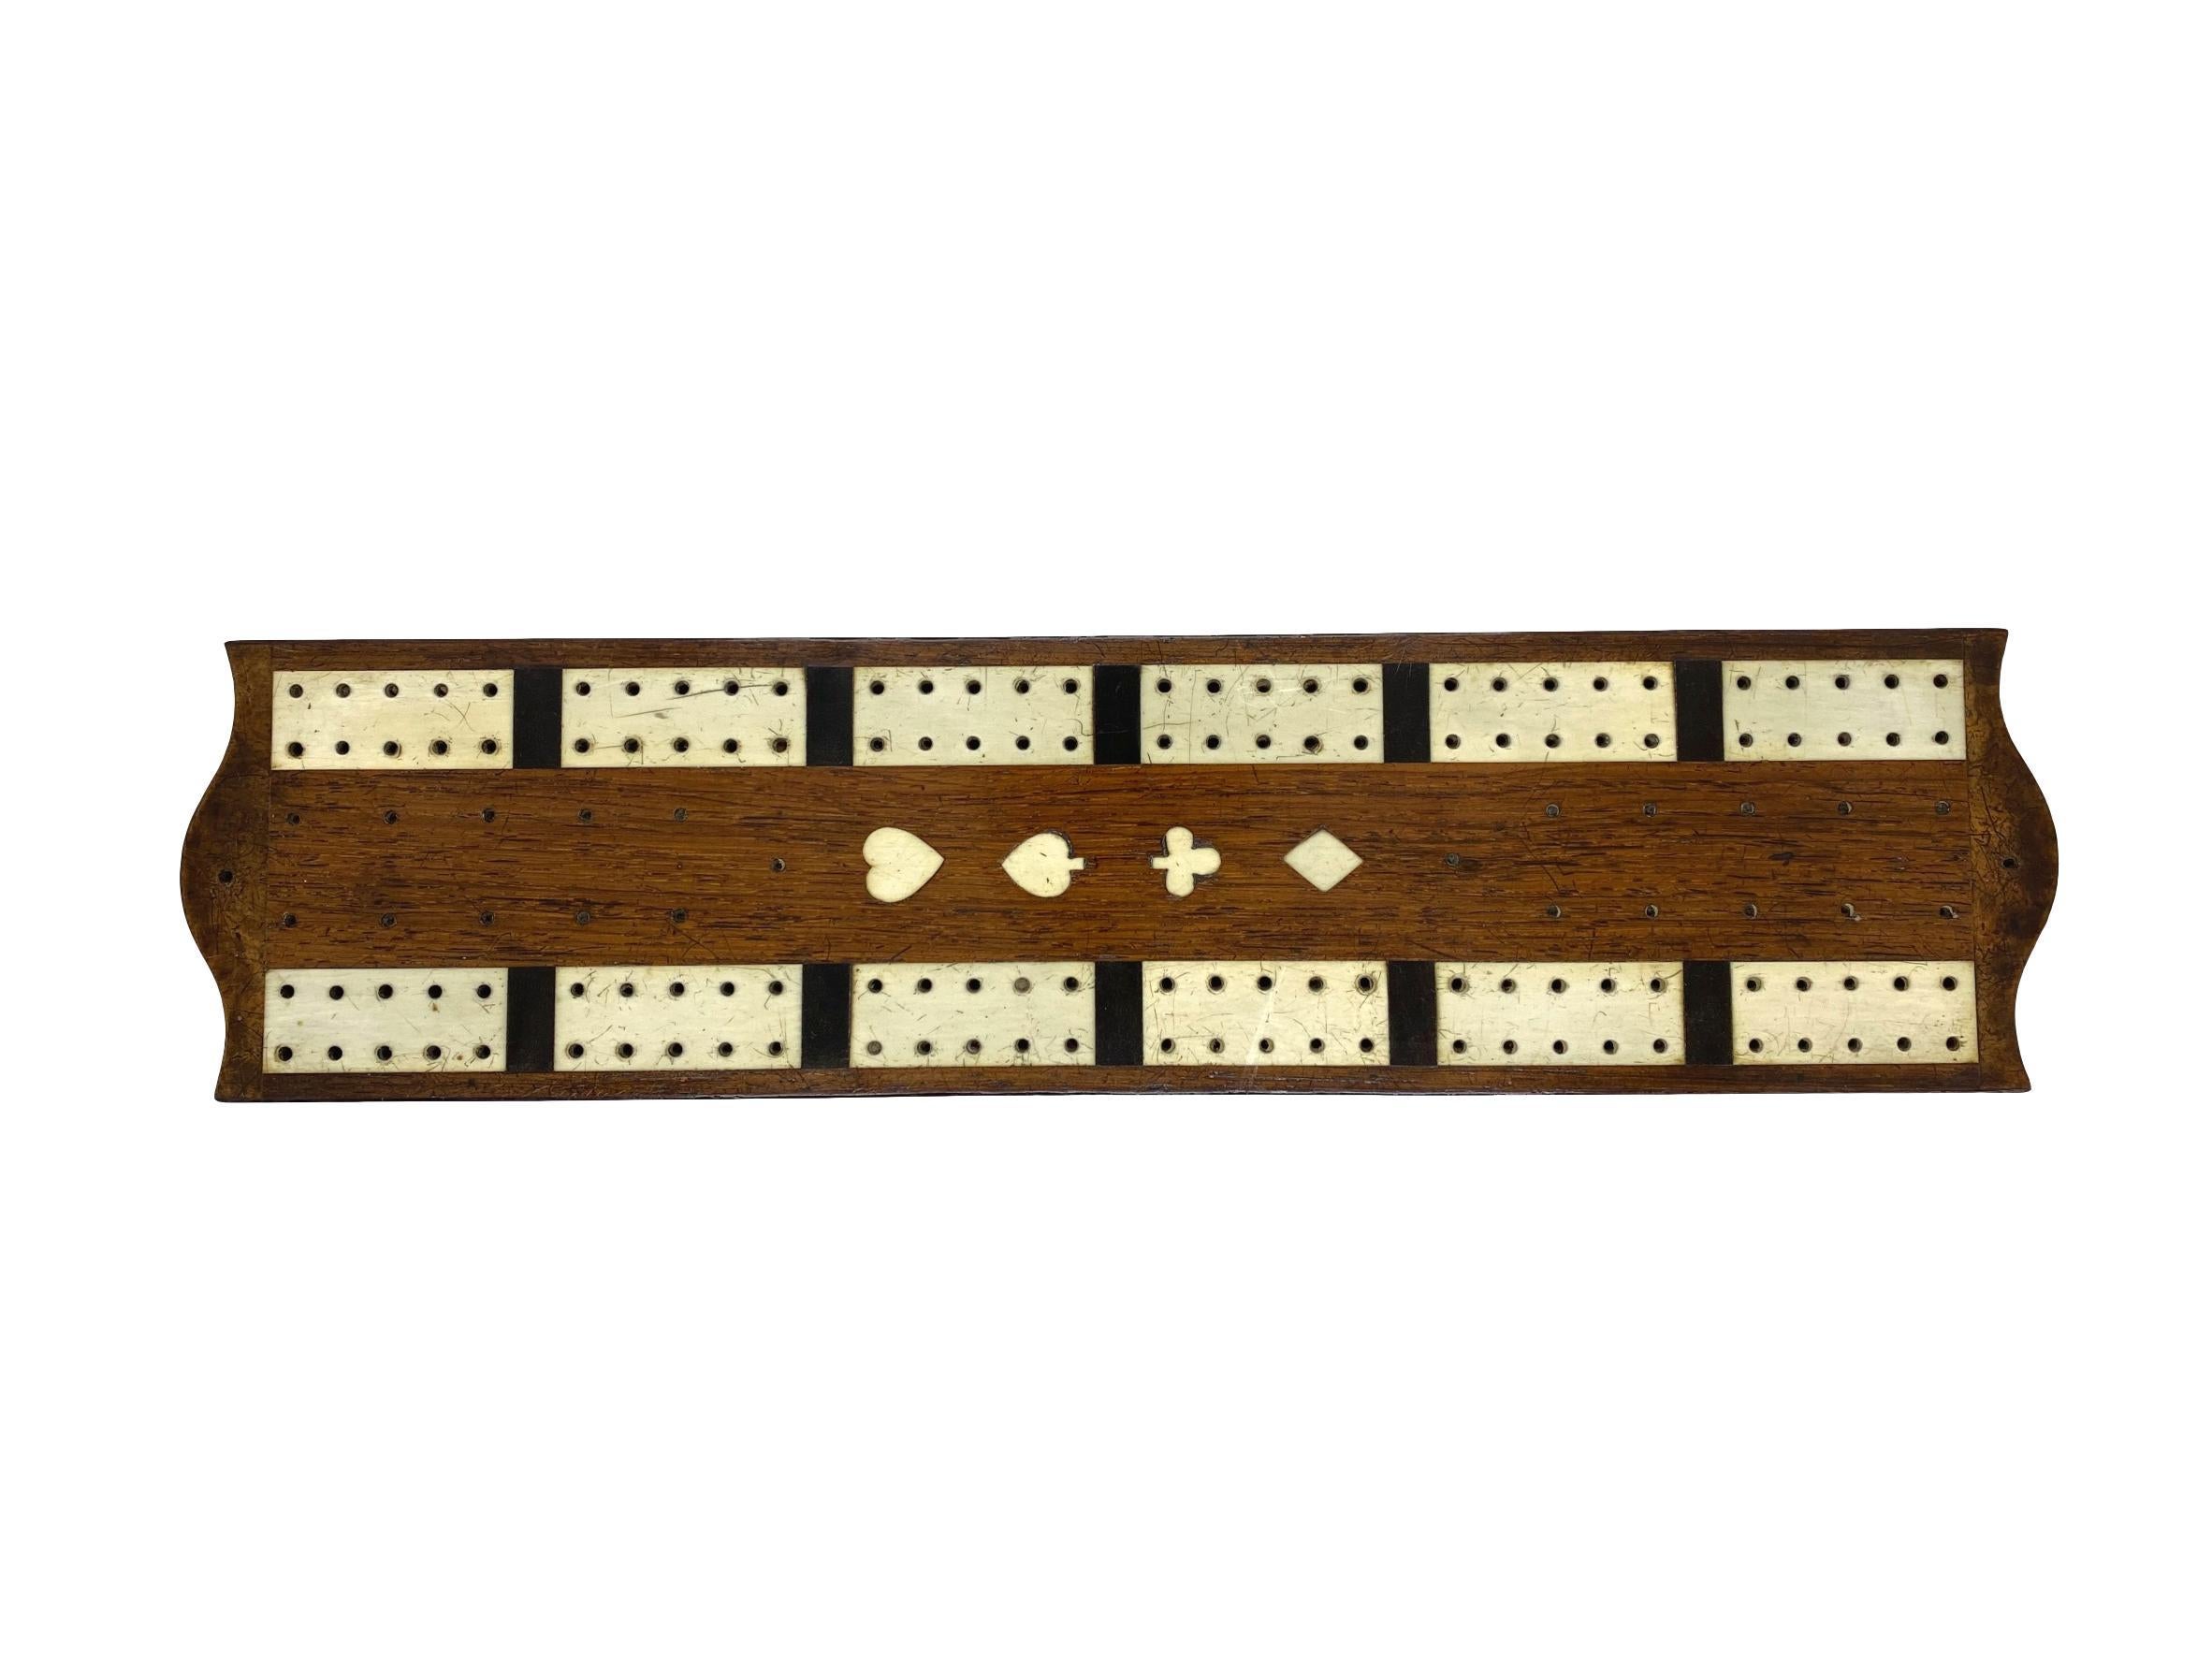 Antique cribbage board and box in mahogany with exotic inlays, English, circa 1880.